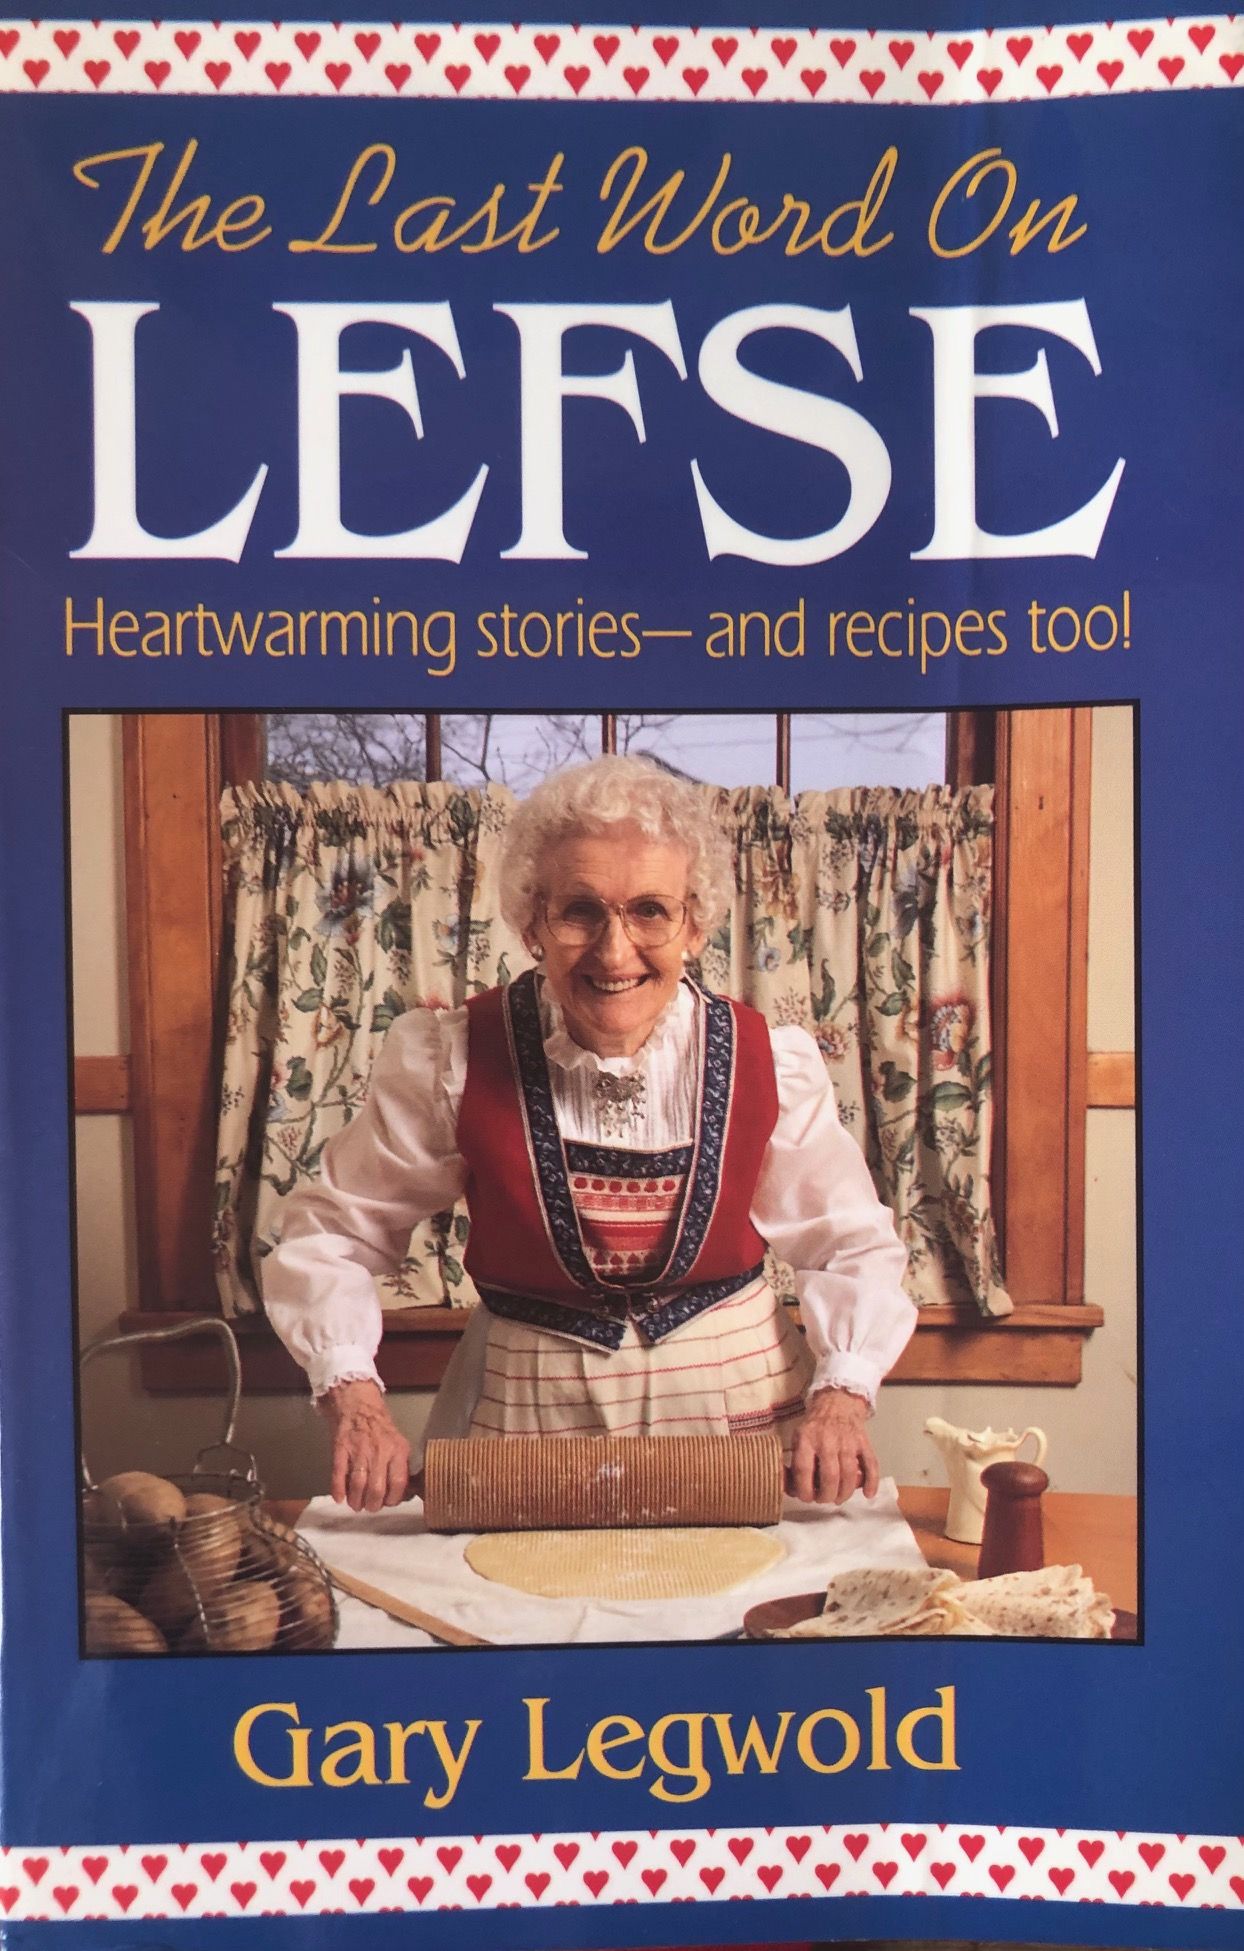 Last Word on Lefse: Heartwarming Stories and Recipes Too! (Gary Legwold)